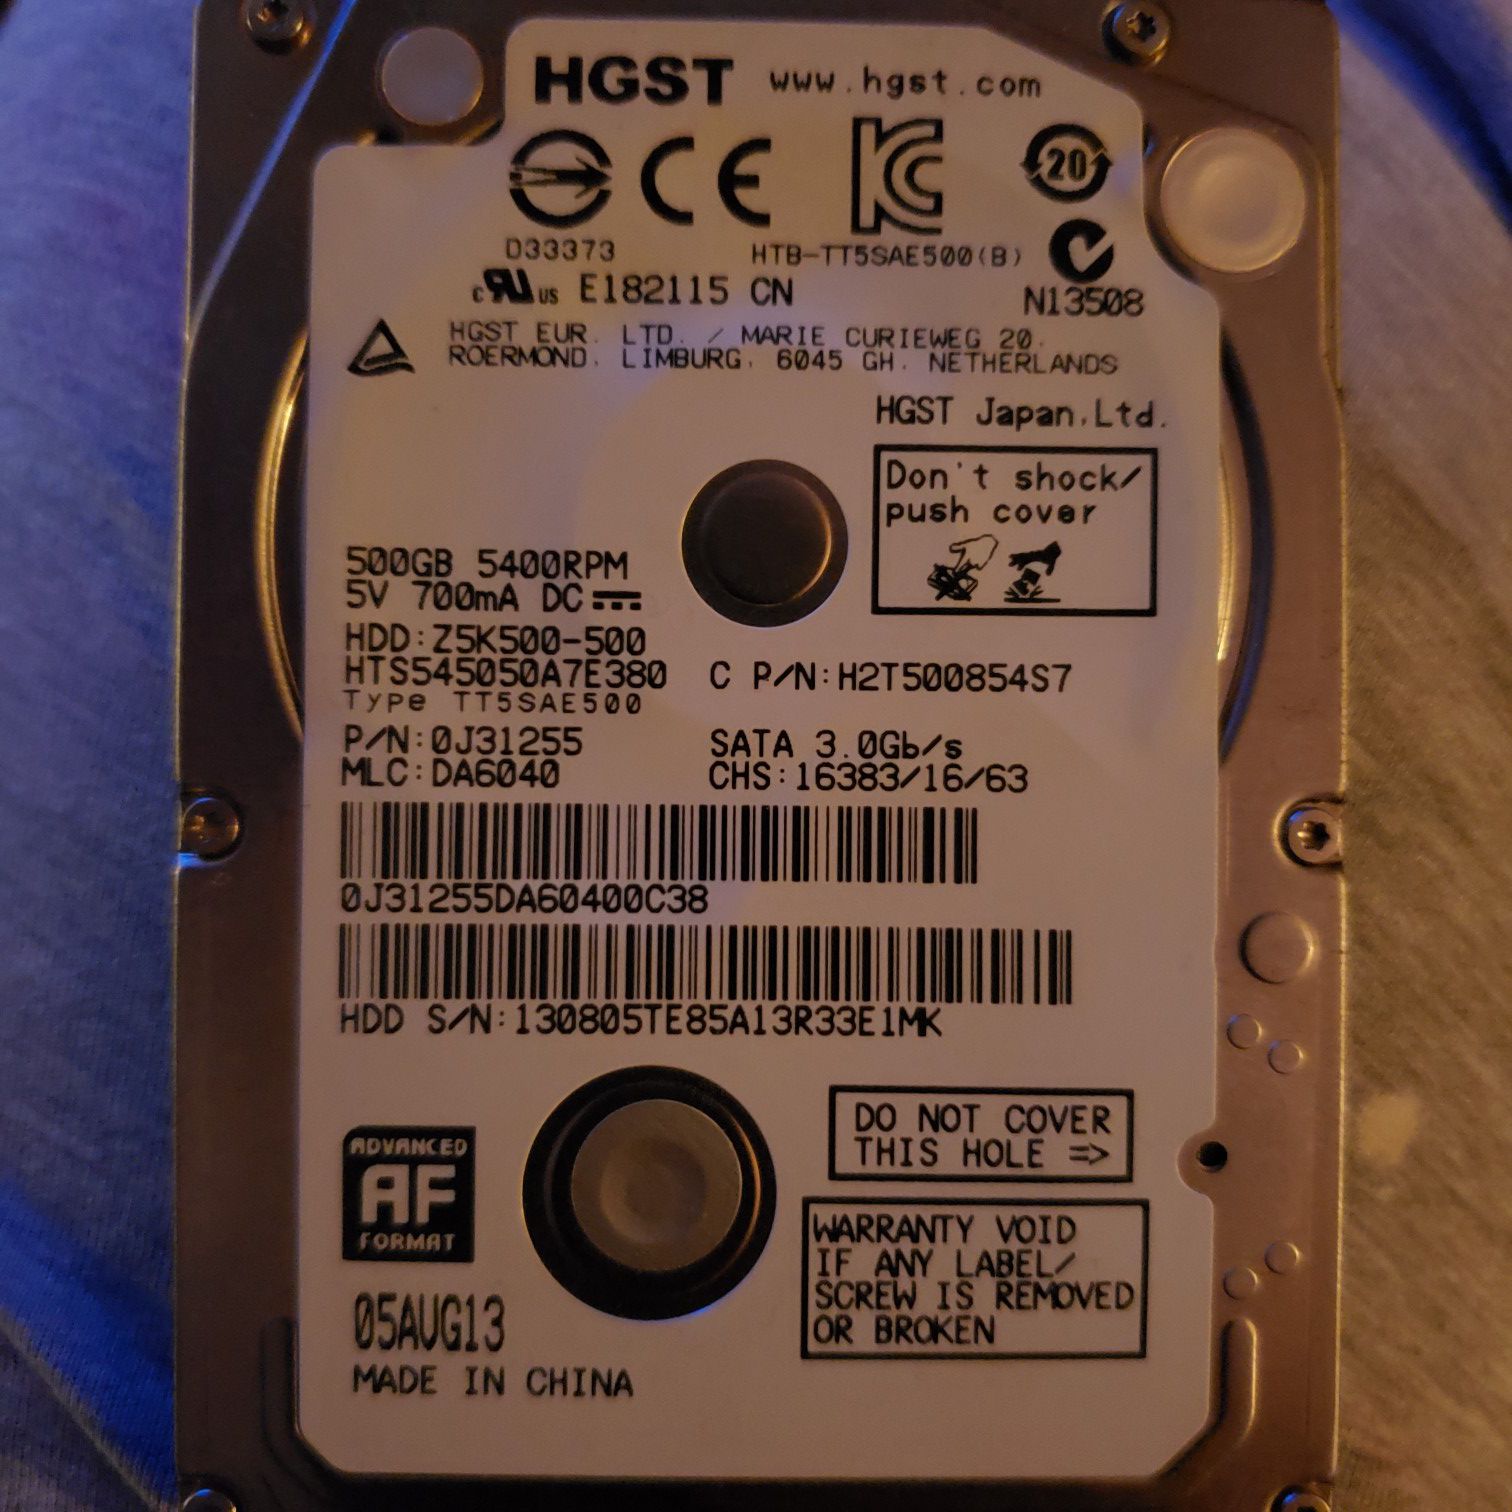 Old Hard drives, weak RAM , worn CPUs and more! wanted ! Will pay if reasonable.